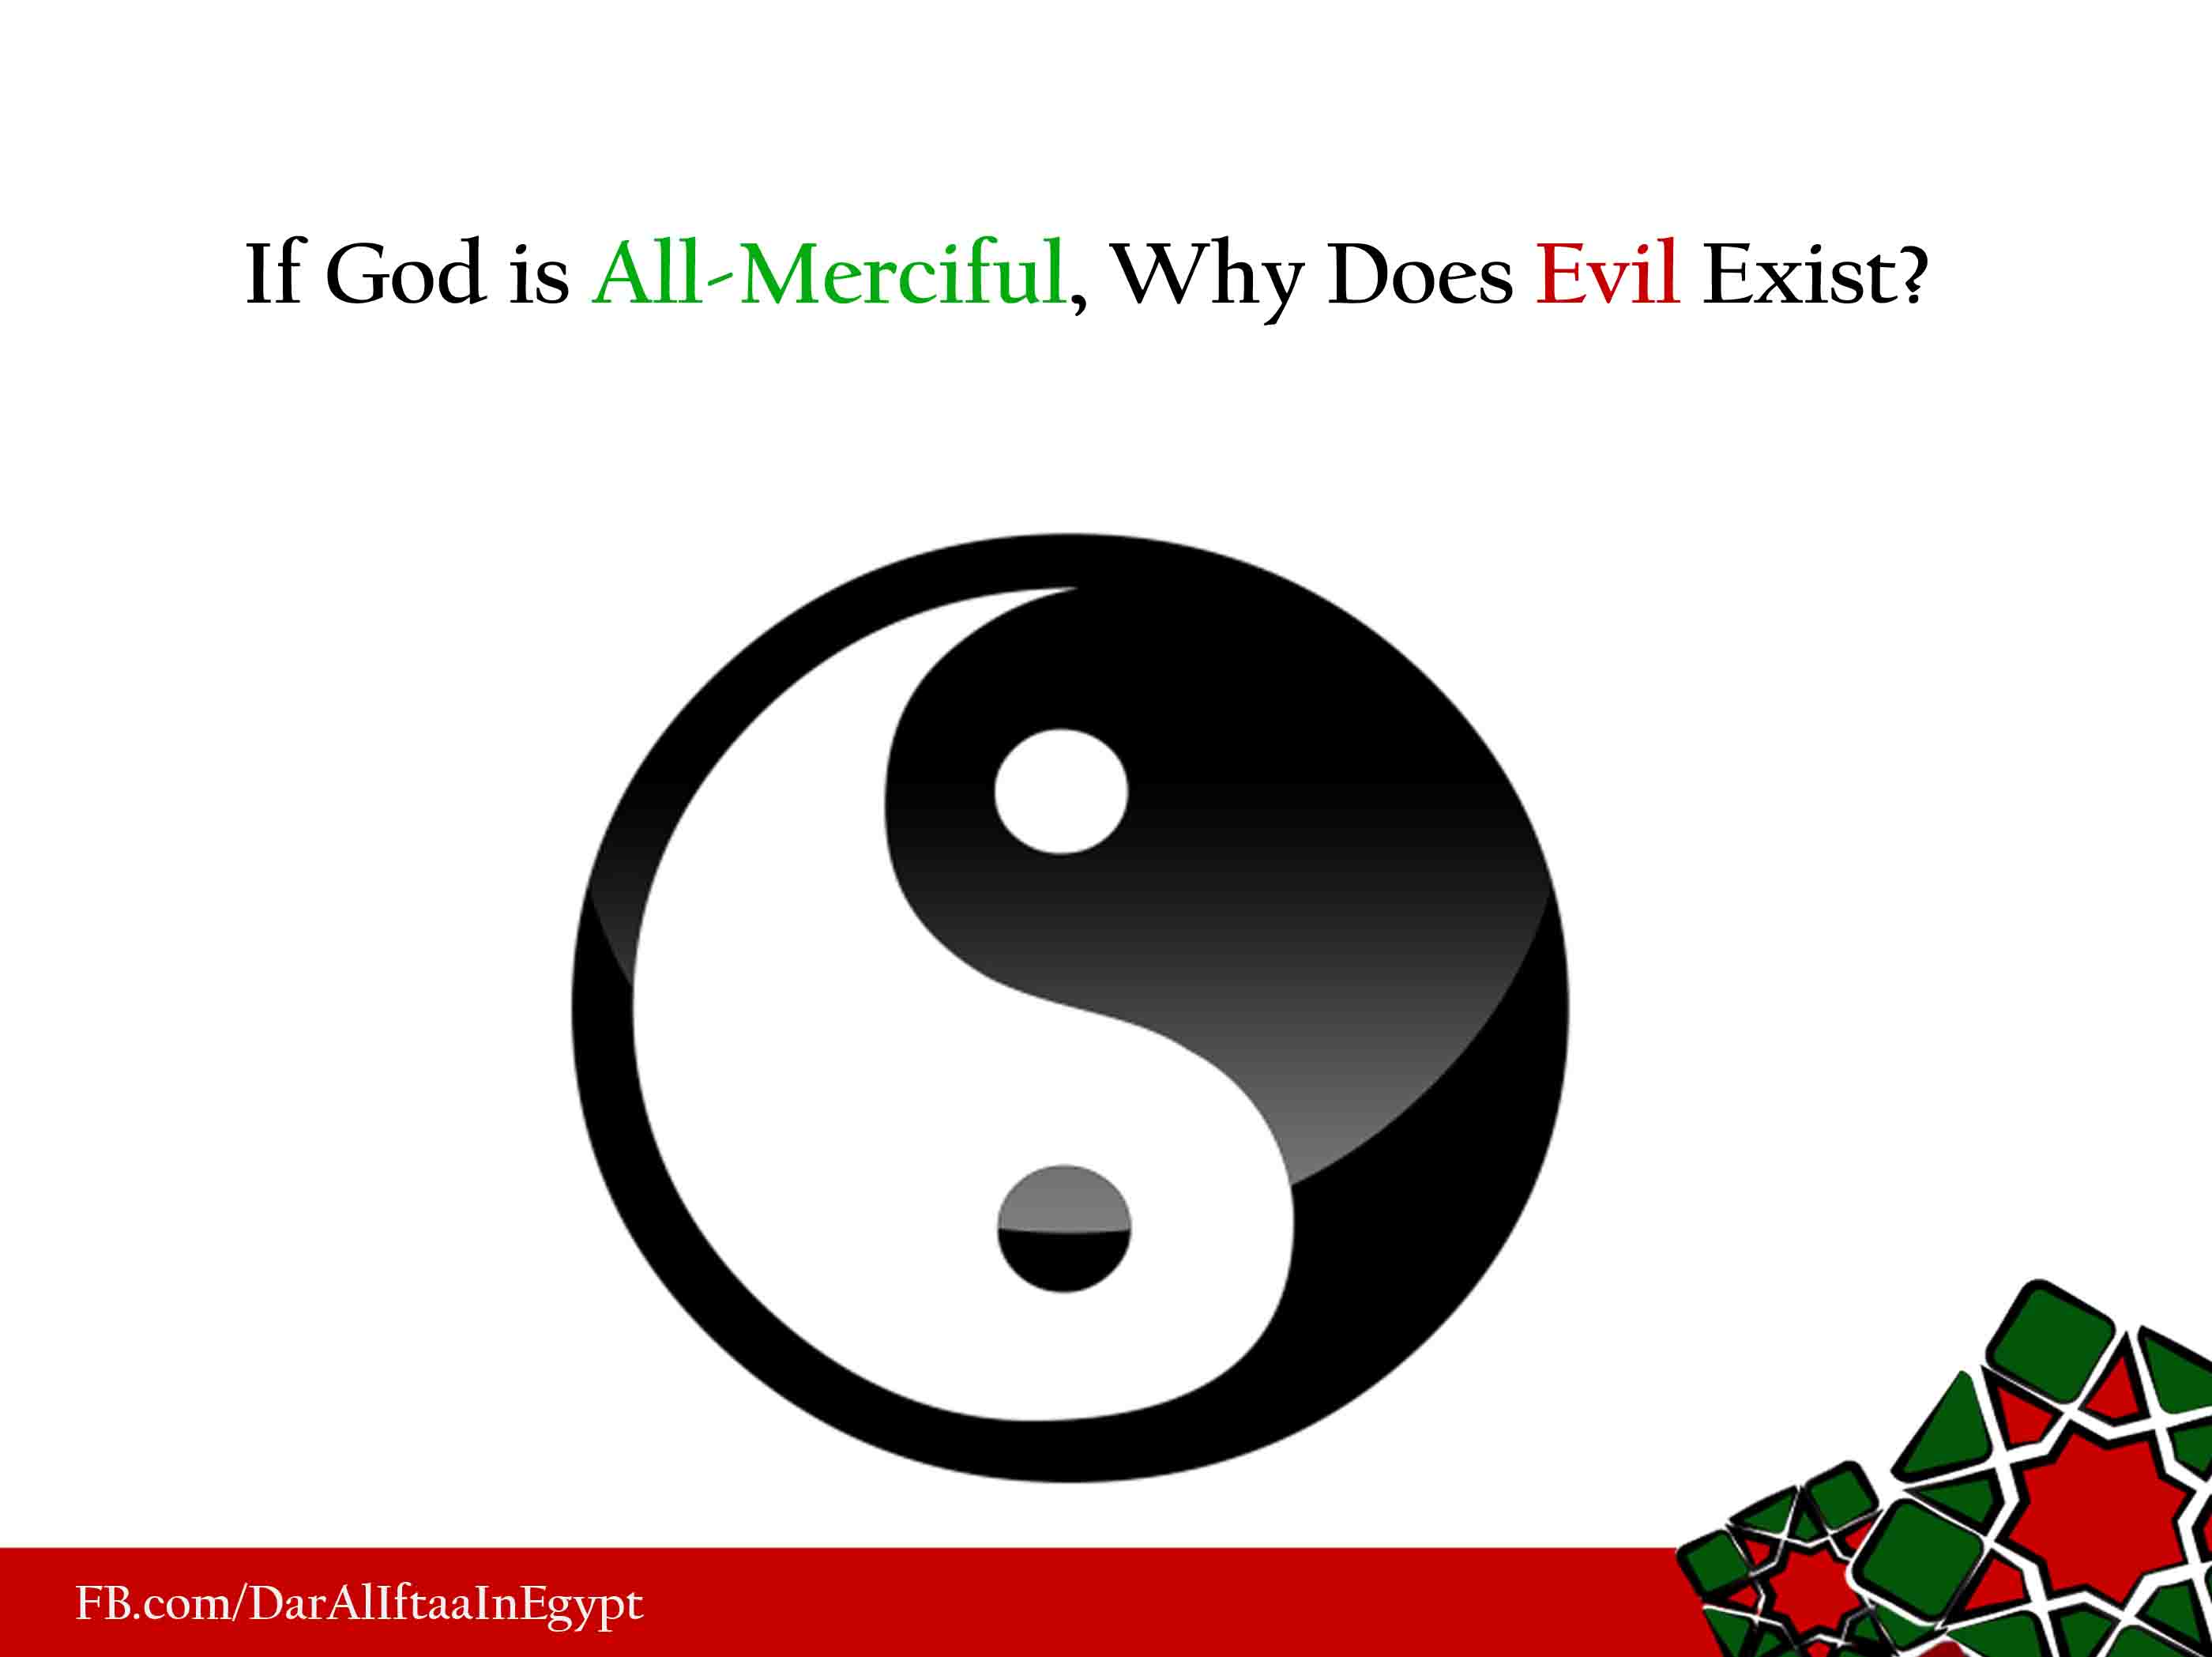 If God is All-Merciful, Why Does Evil Exist?